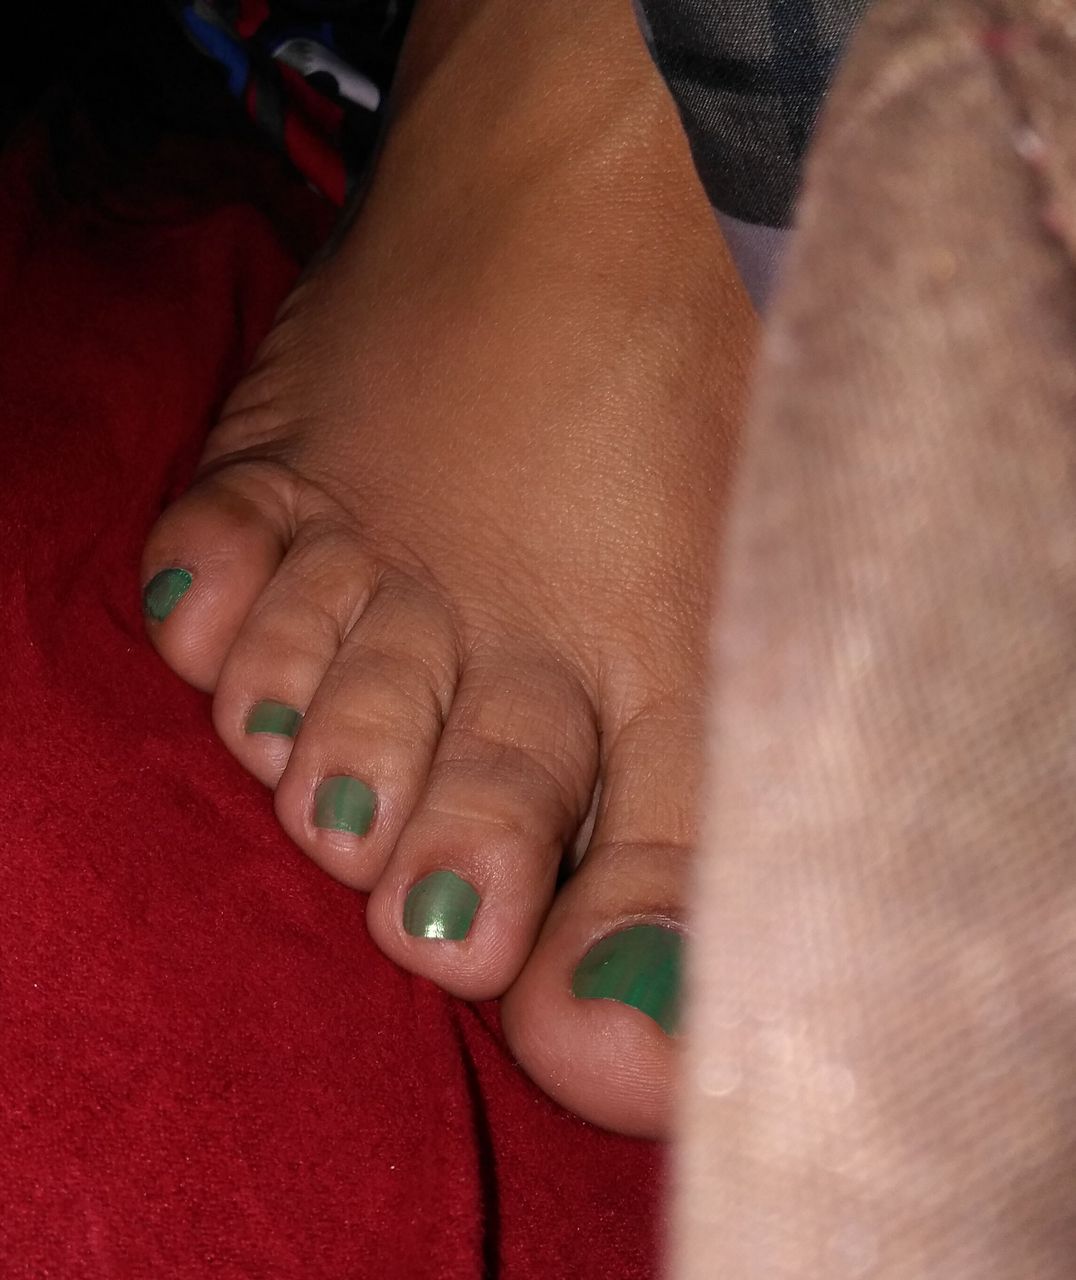 Lee Lee S Toes Green Toes Soft Soles